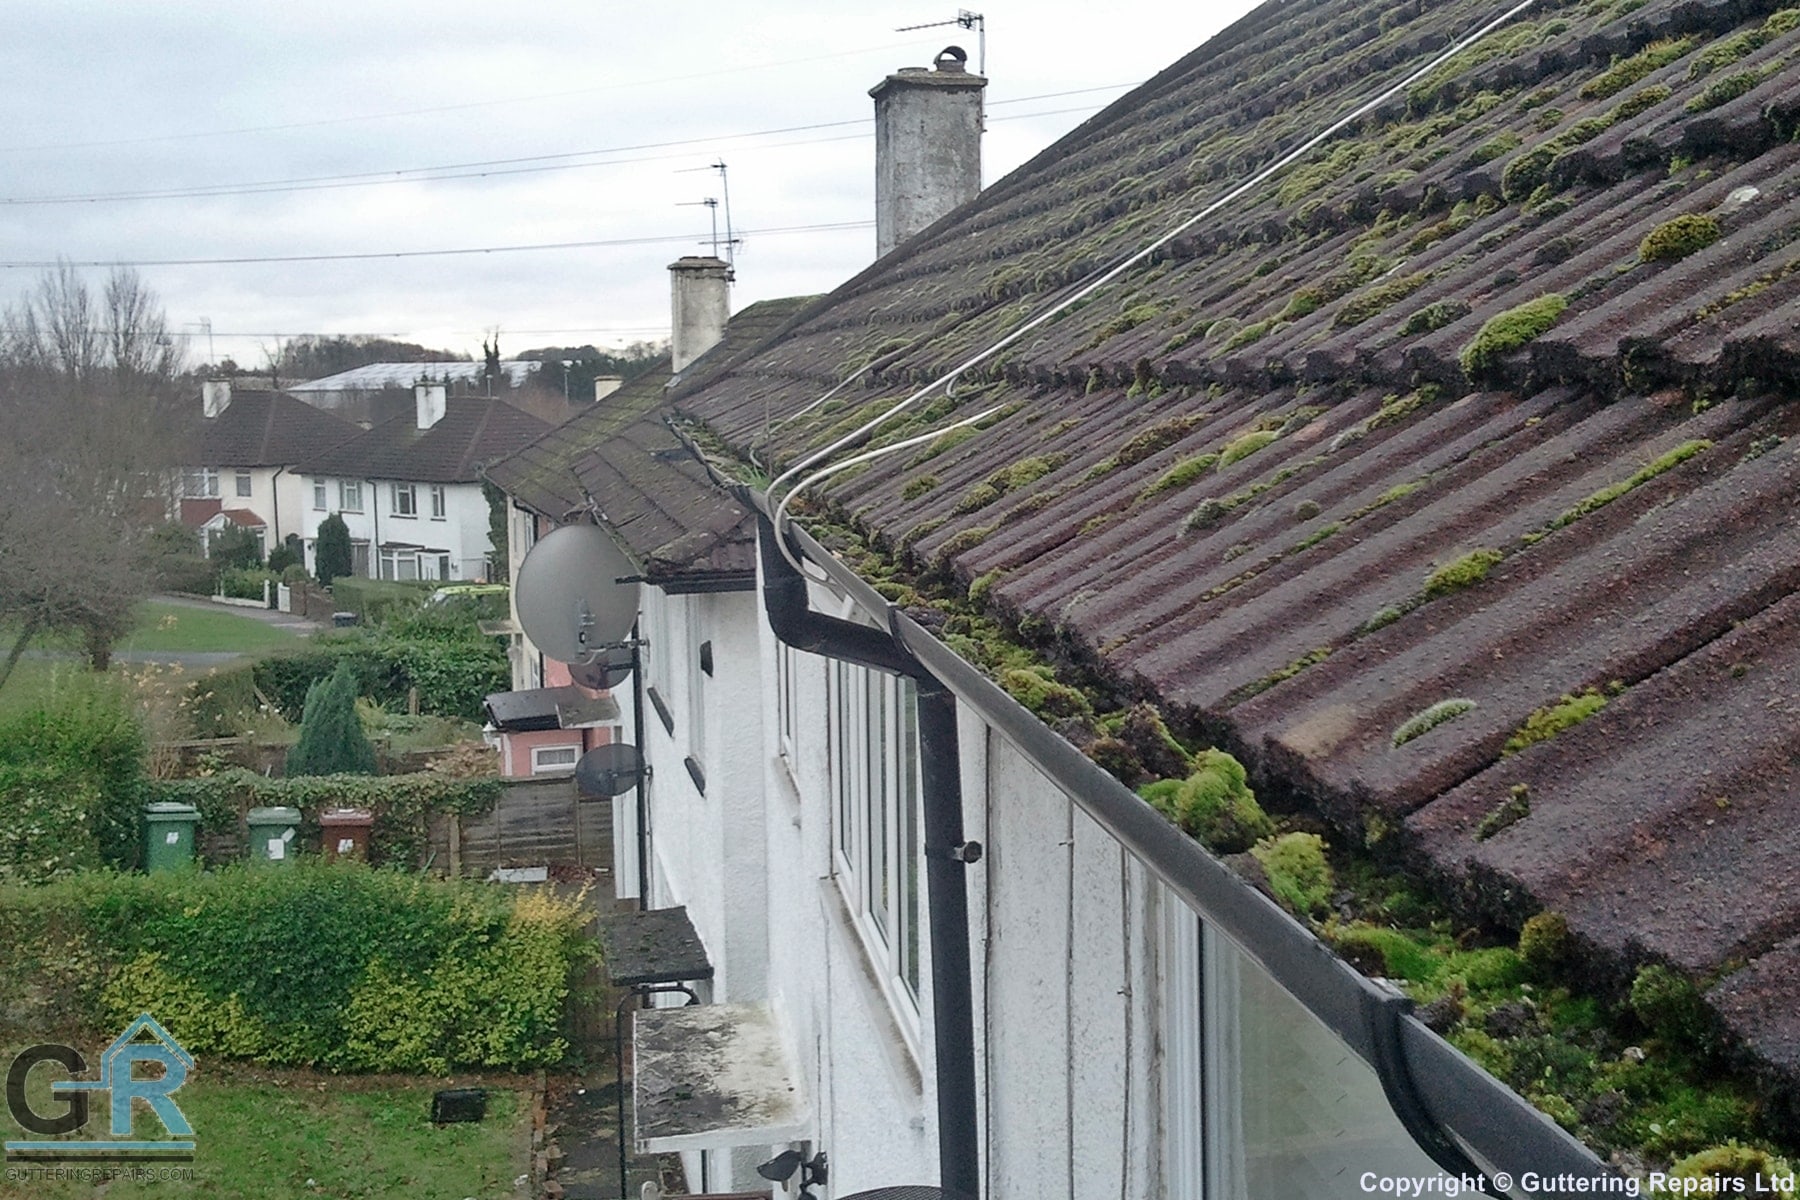 Guttering and Roofing Services